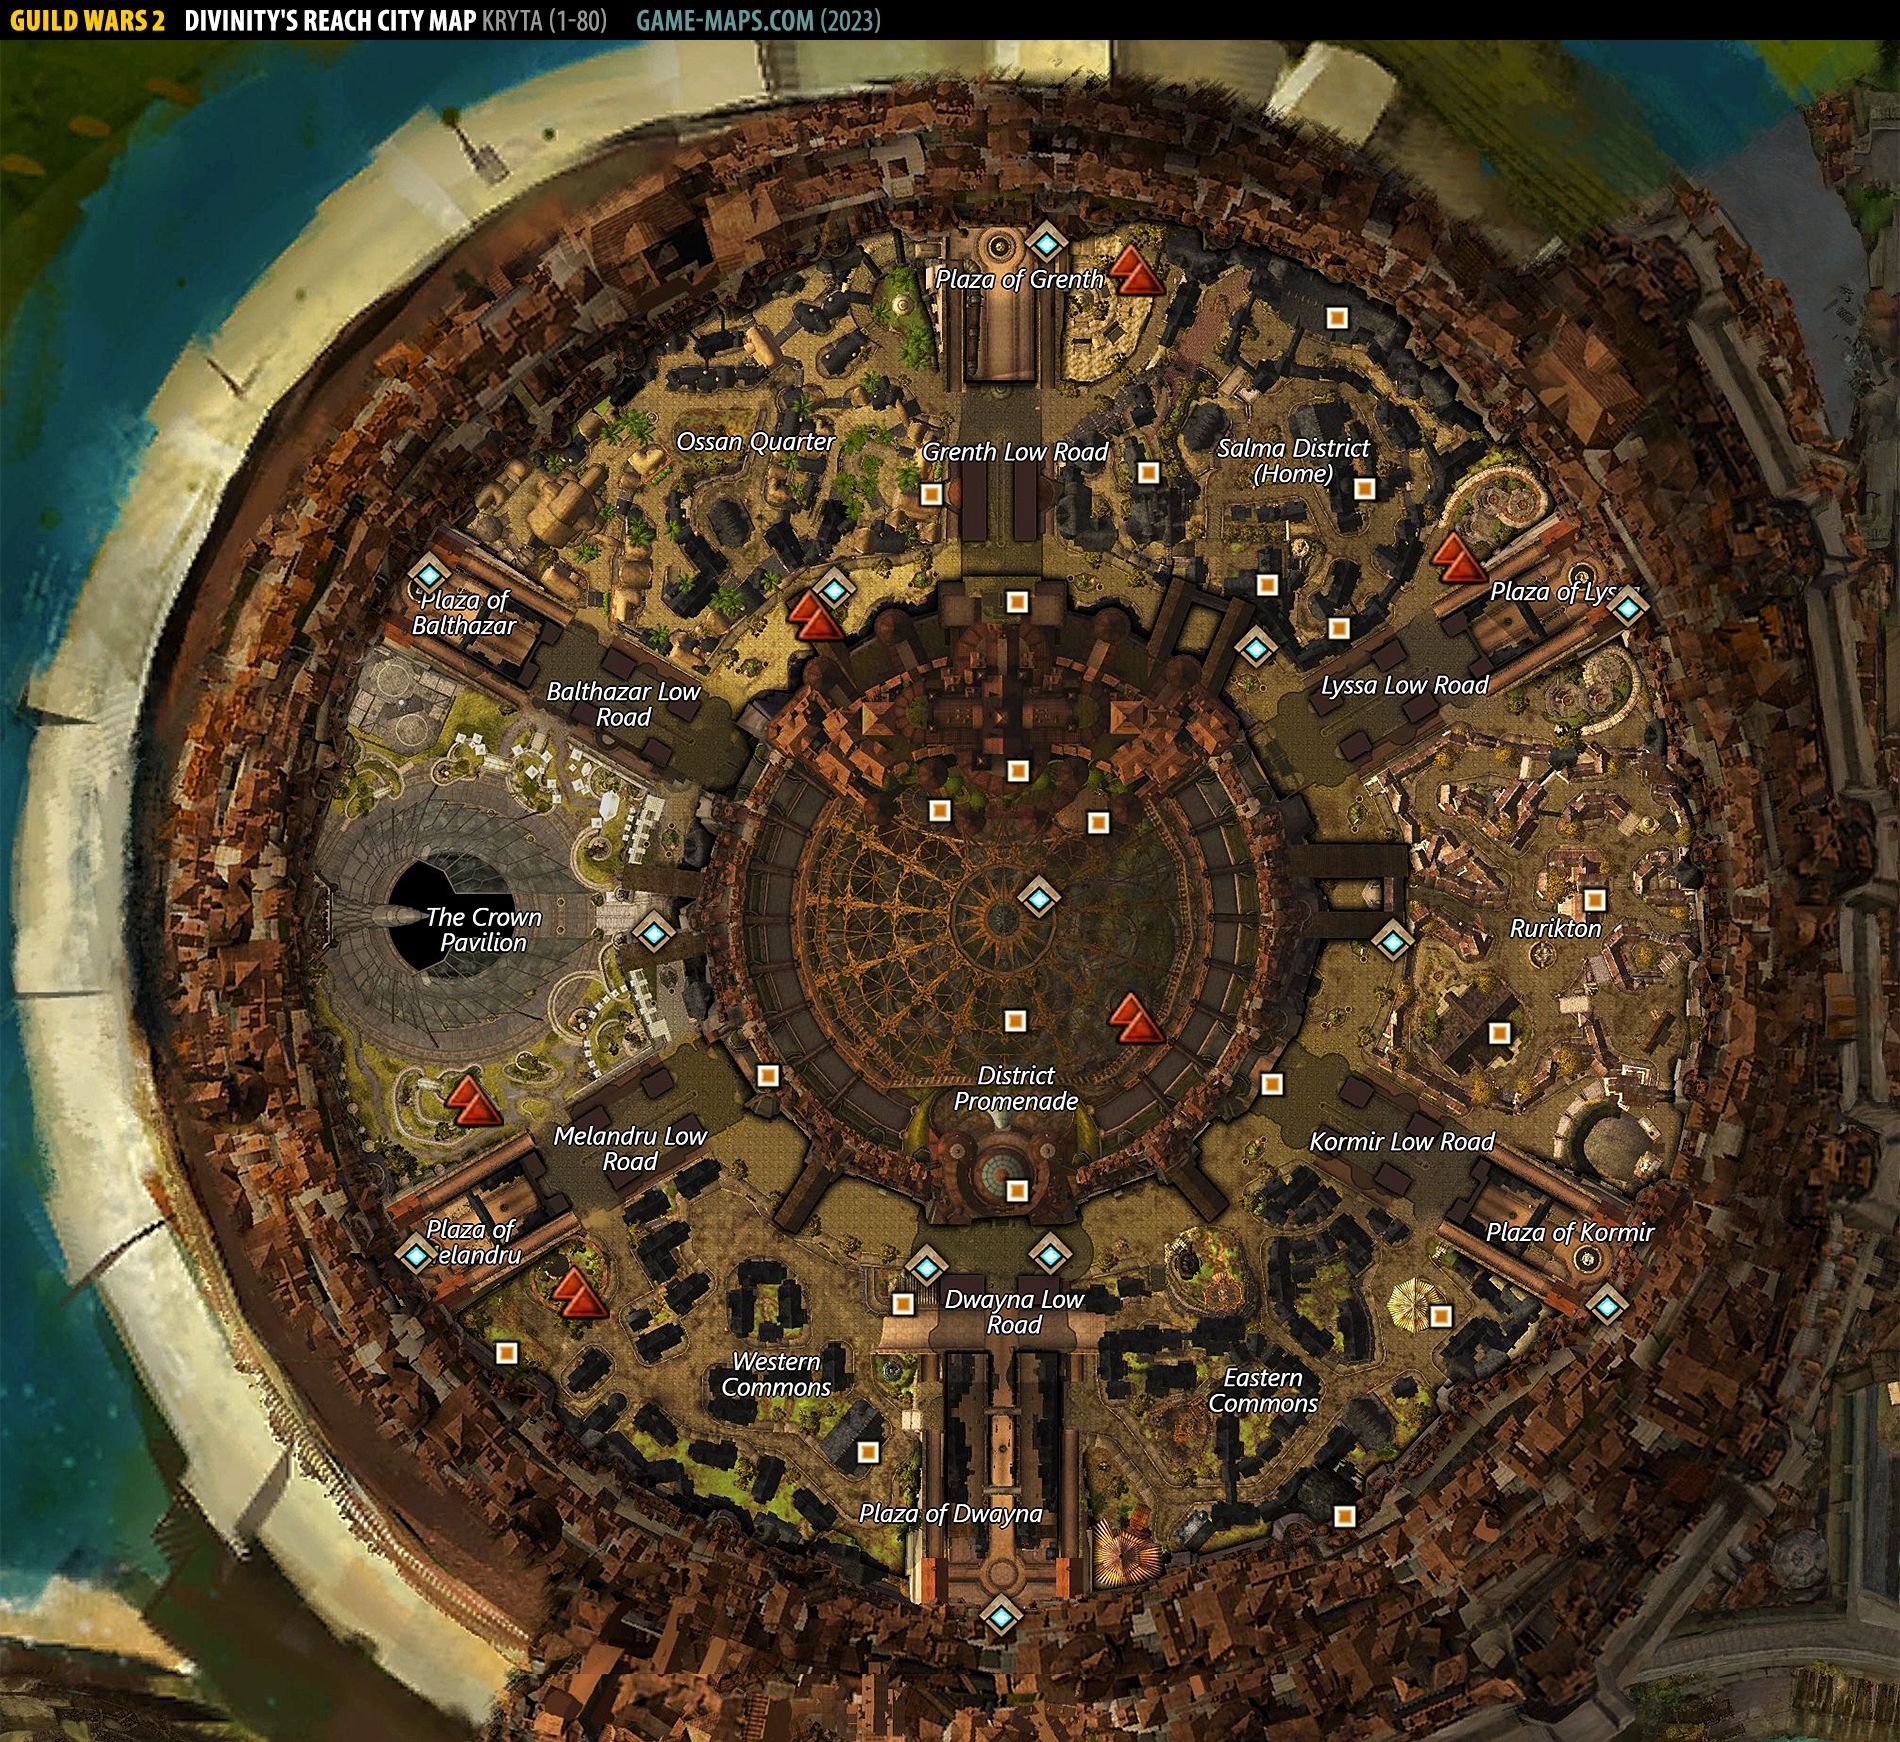 Divinity's Reach City Map for Guild Wars 2 (2019)